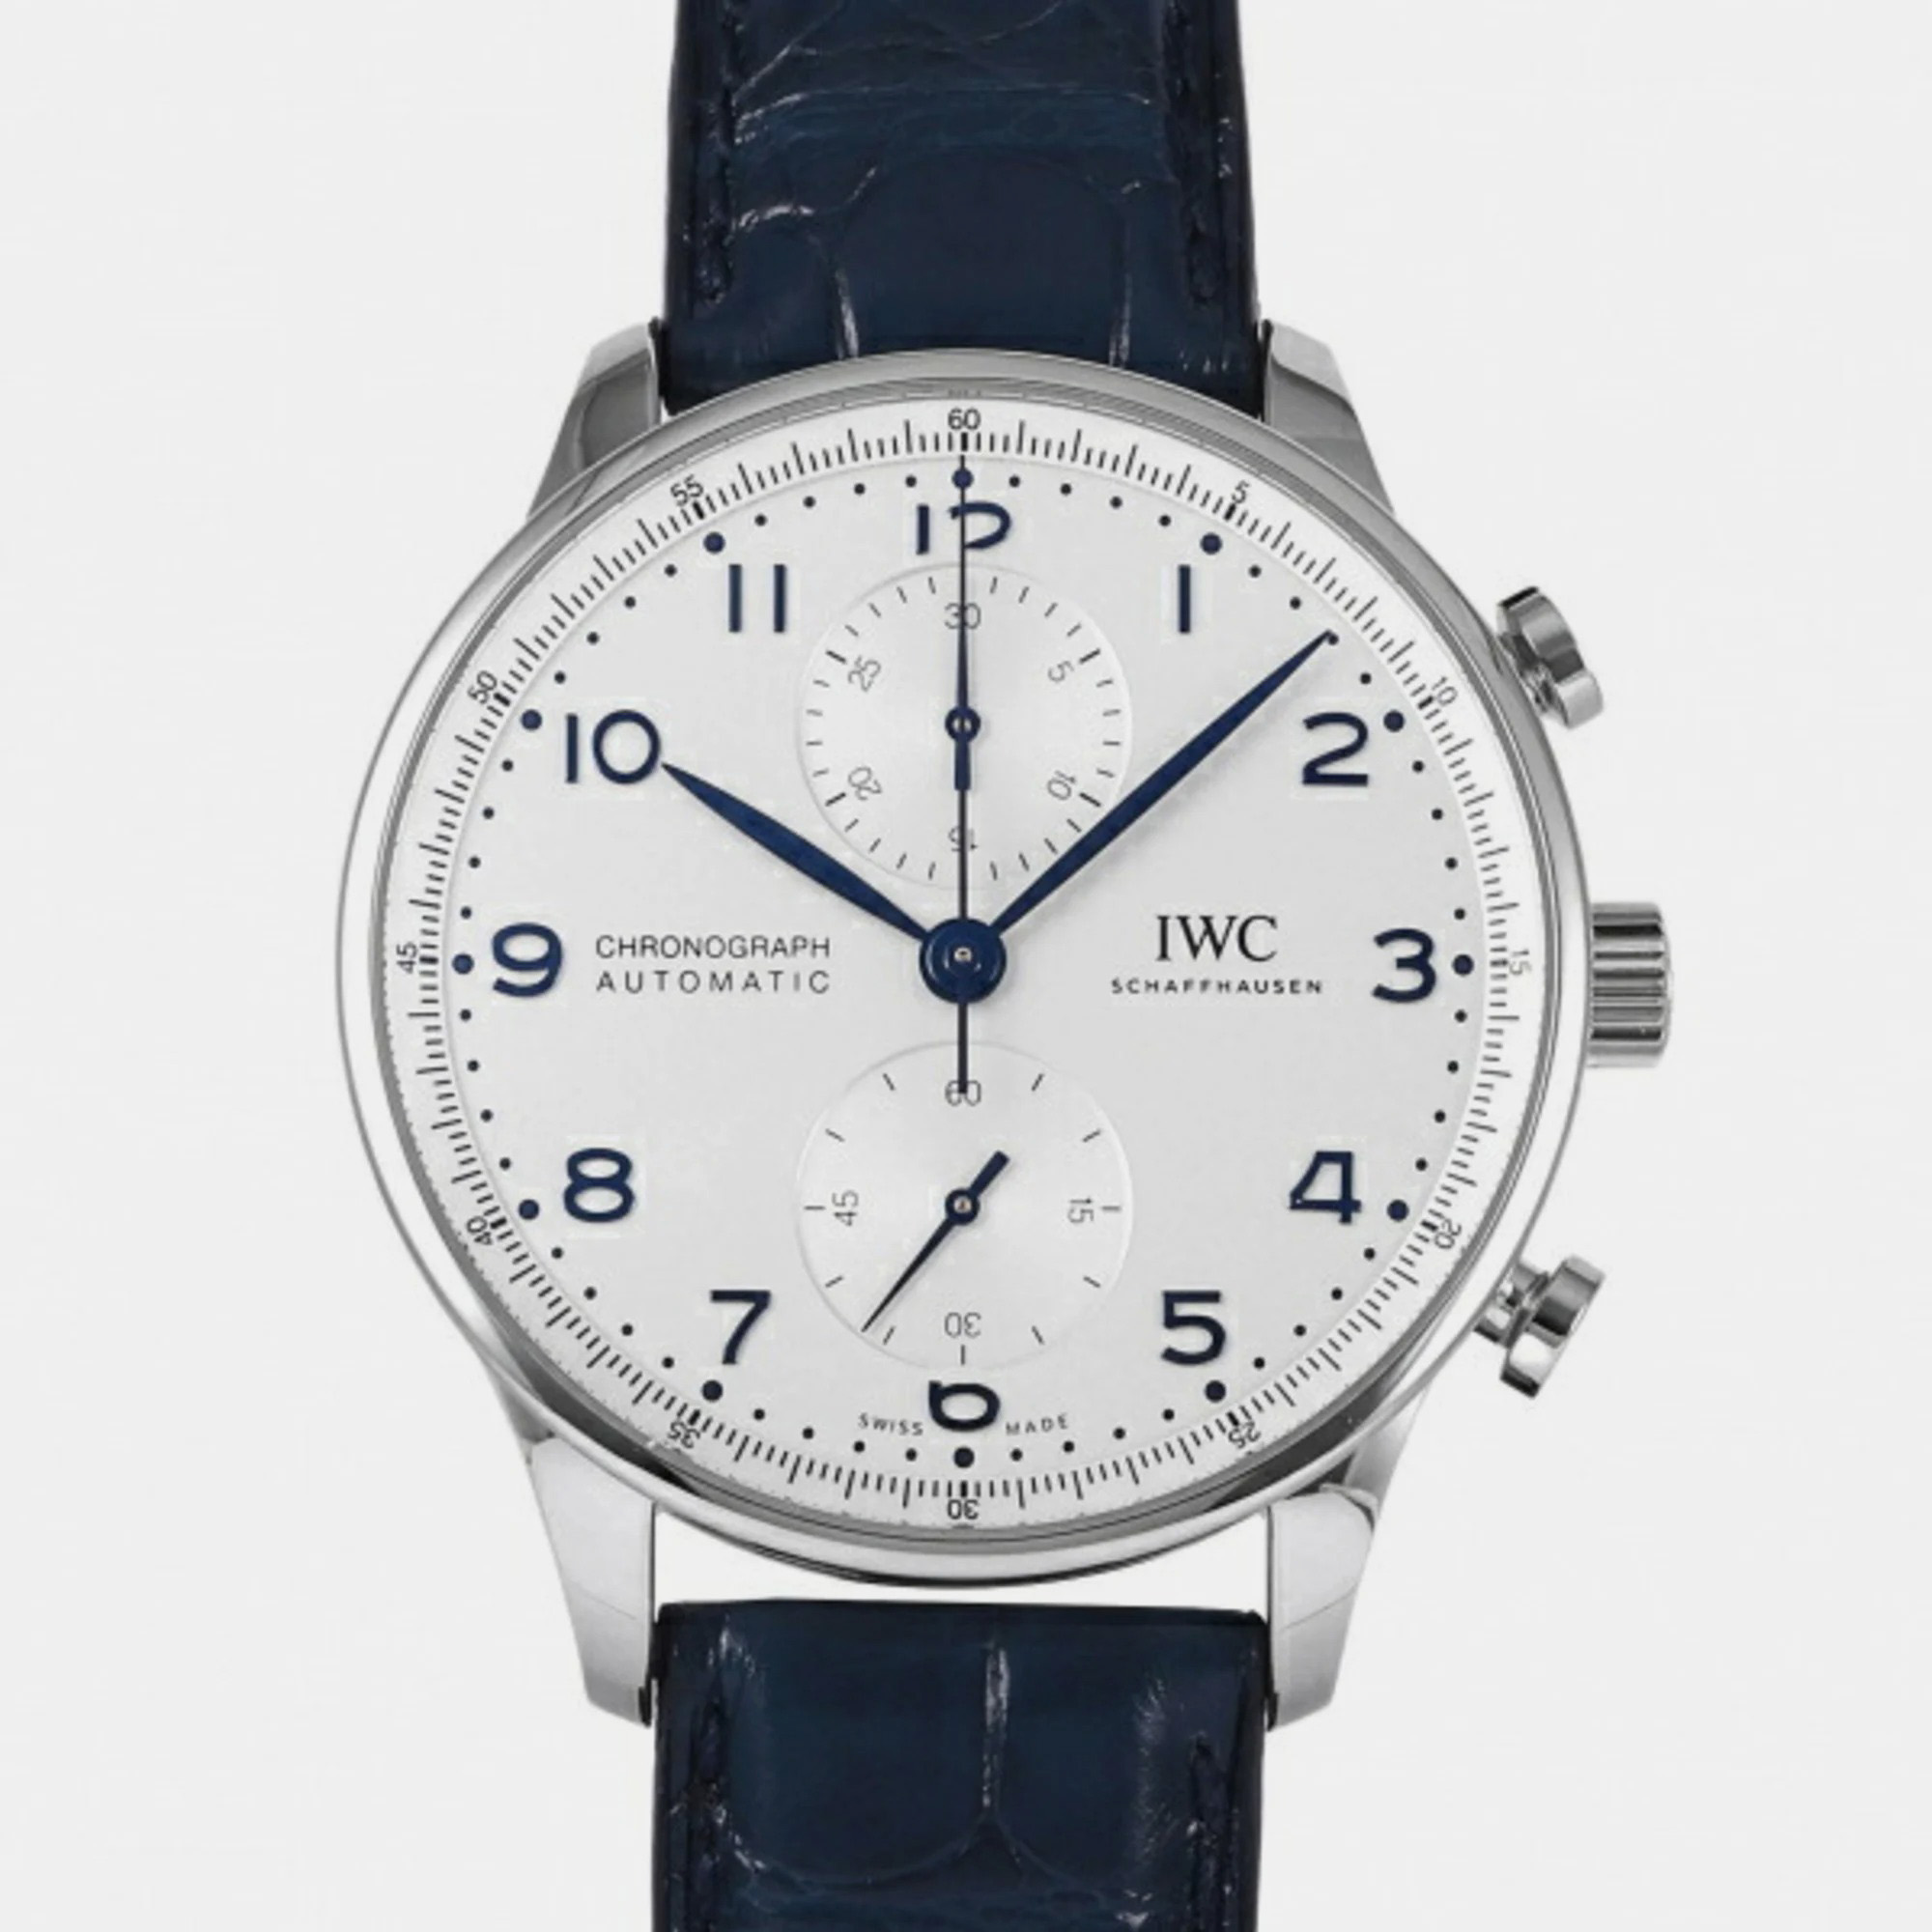 A meticulously crafted watch holds the promise of enduring appeal all day comfort and investment value. Carefully assembled and finished to stand out on your wrist this IWC timepiece is a purchase you will cherish.